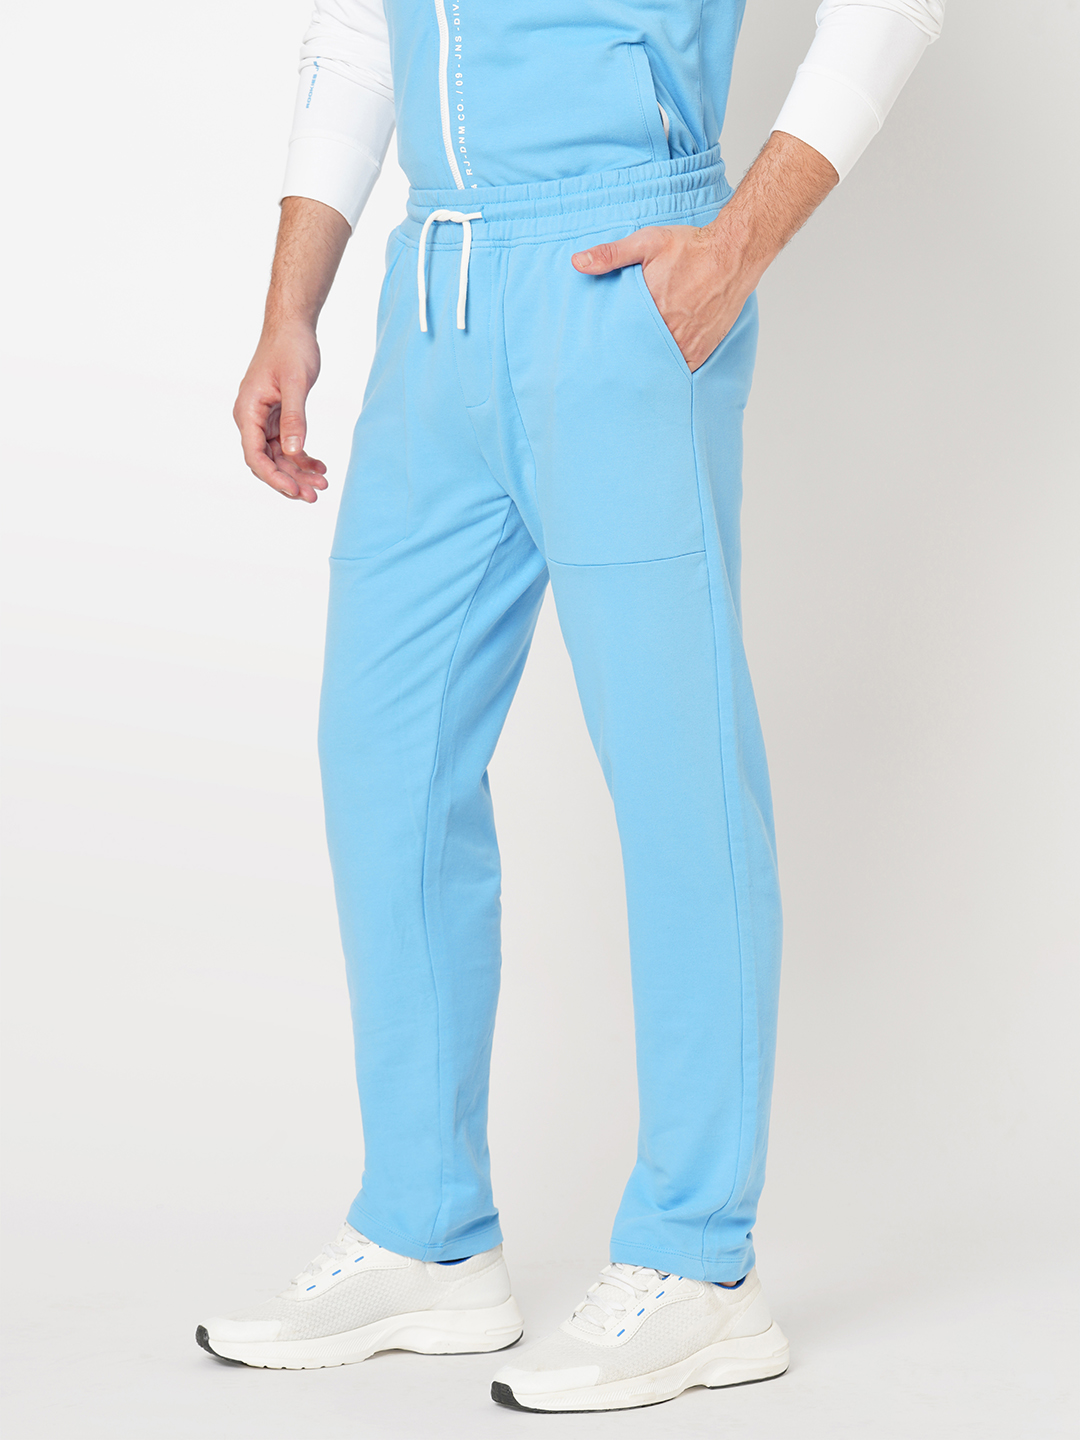 SKY BLUE ATHLEISURE TRACK PANT (COMFORT FIT)